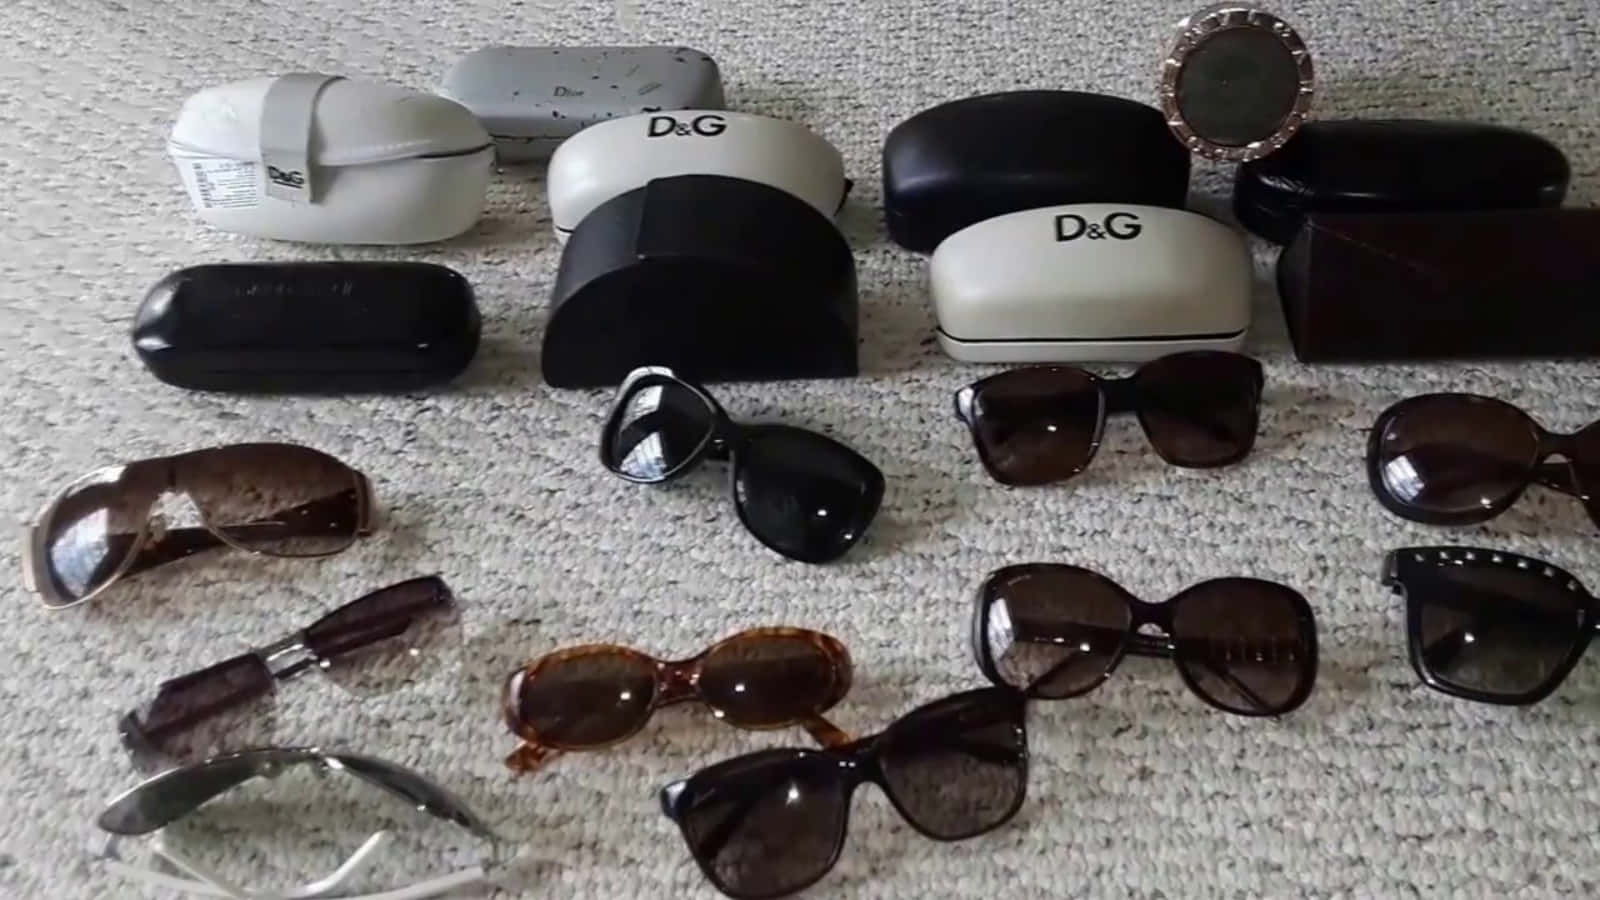 A Group Of Sunglasses And Cases Are Laid Out On A Carpet